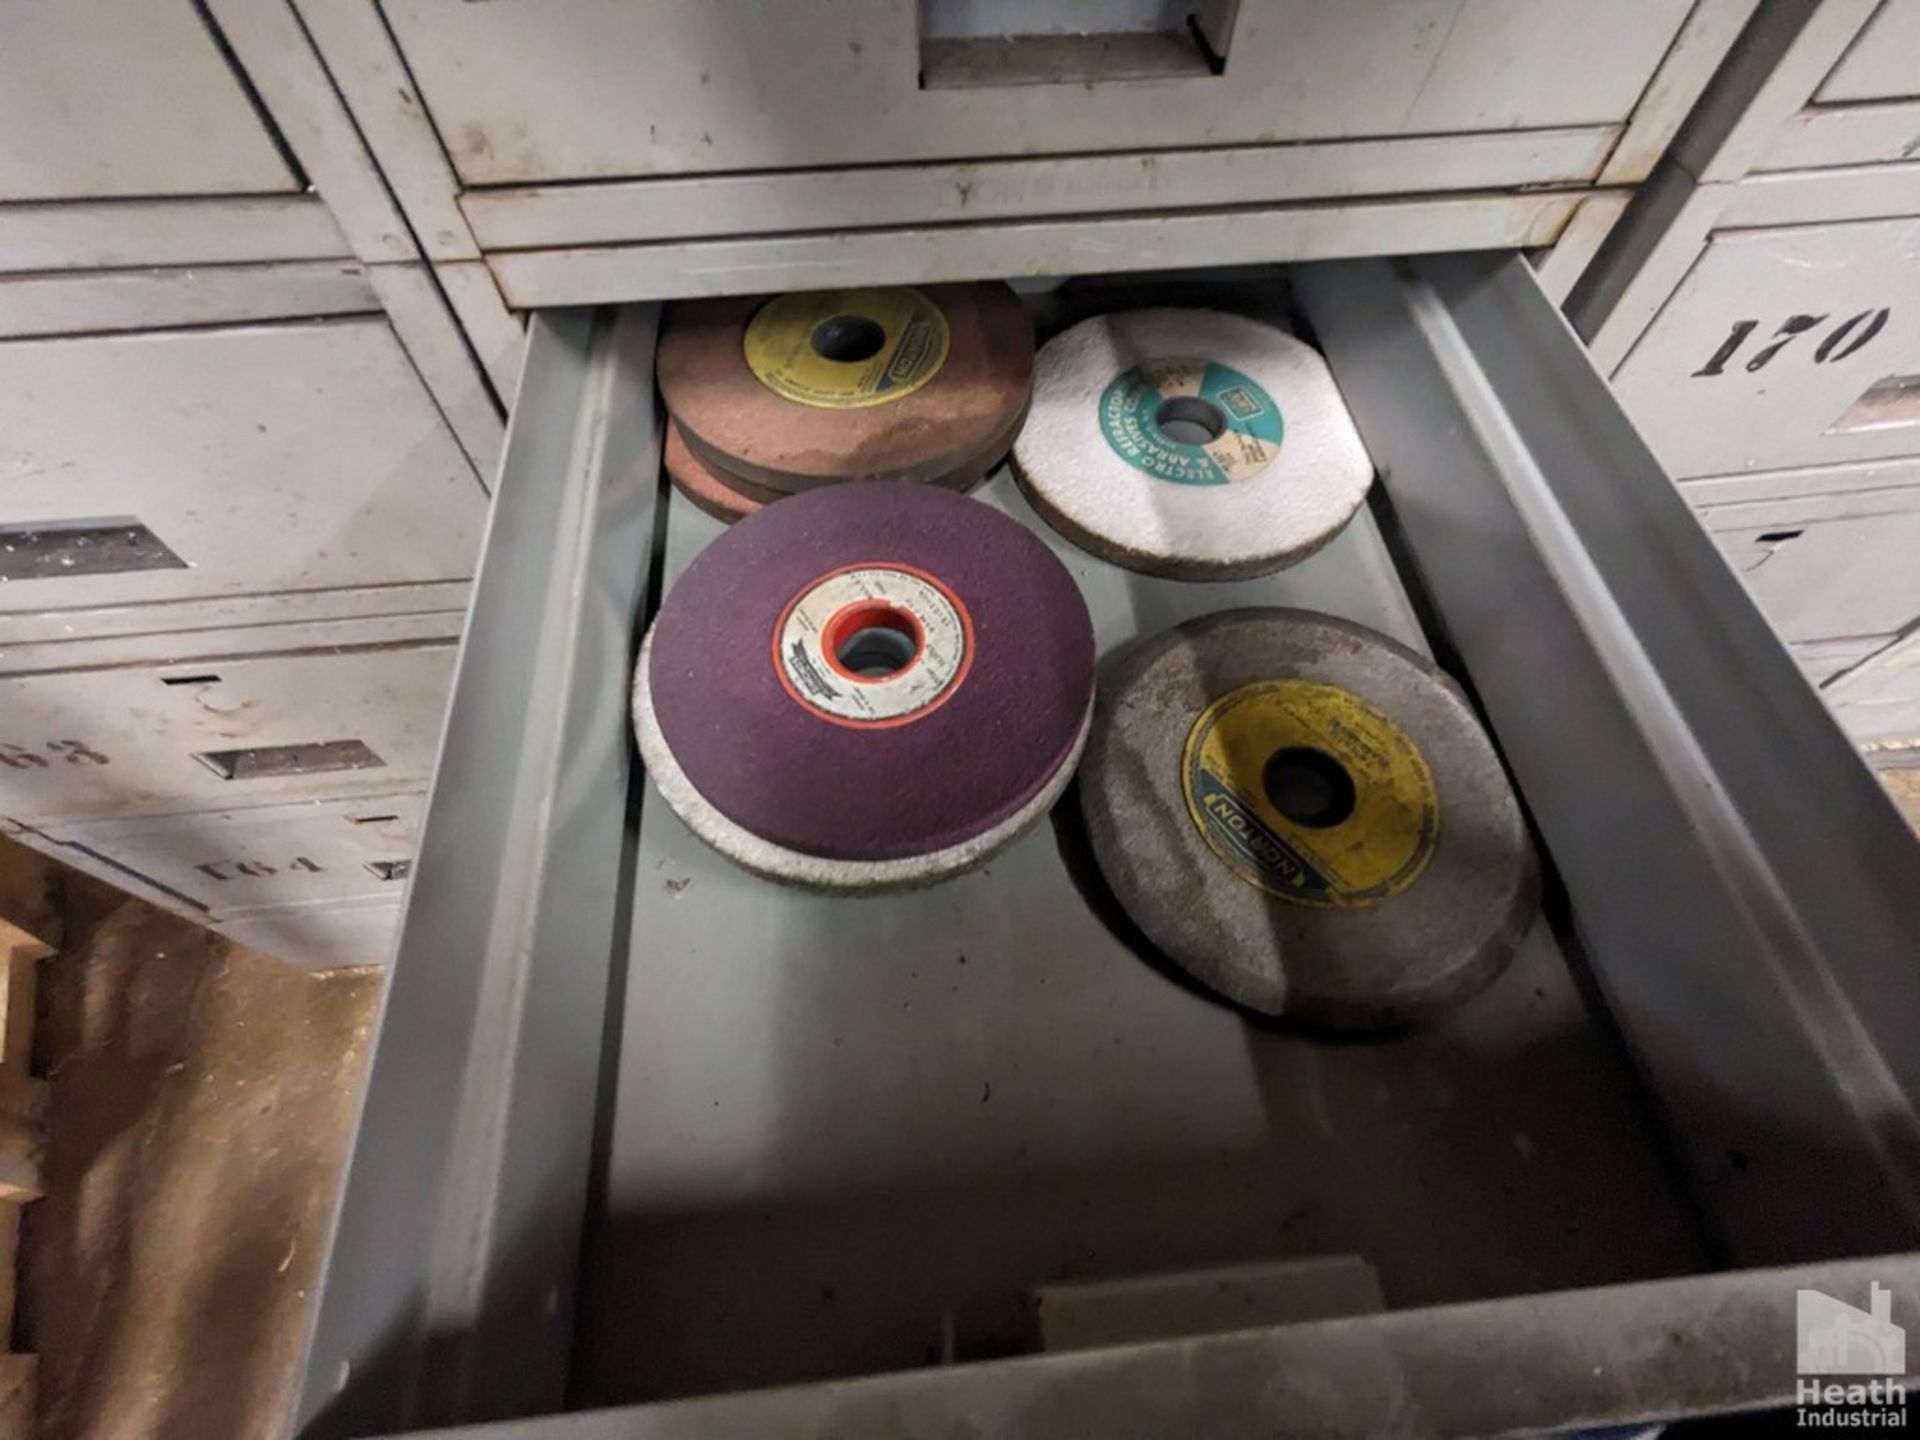 ASSORTED GRINDING WHEELS IN DRAWERS Loading Fee :$100 - Image 4 of 5